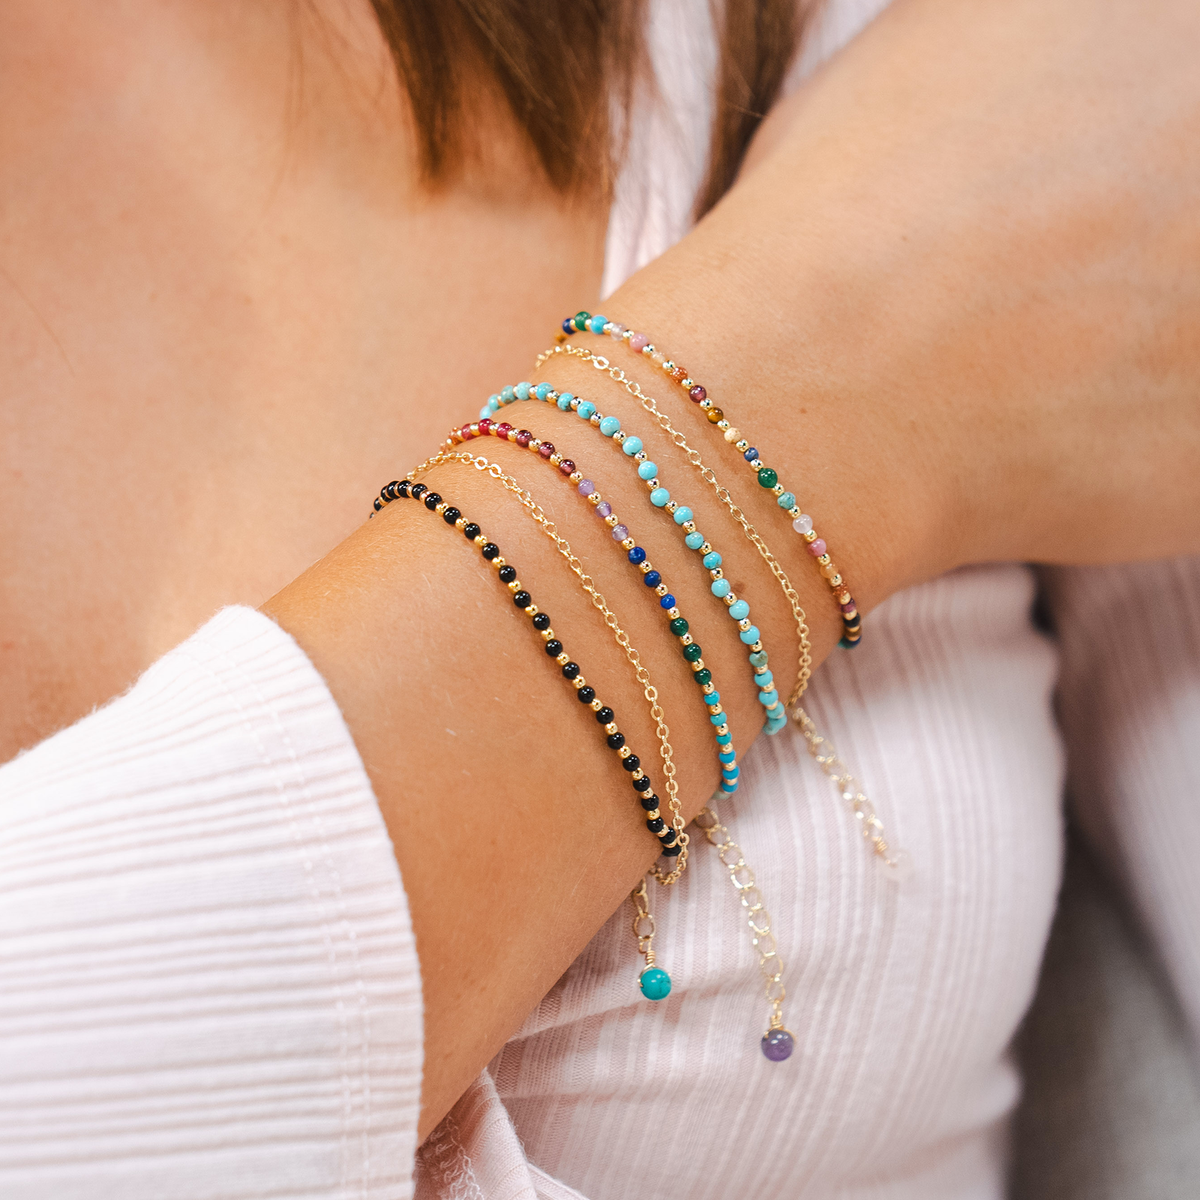 Dainty bracelet with assorted multi-color stones and gold beads pictured with a stack of turquoise, onyx and multi-colored bracelets